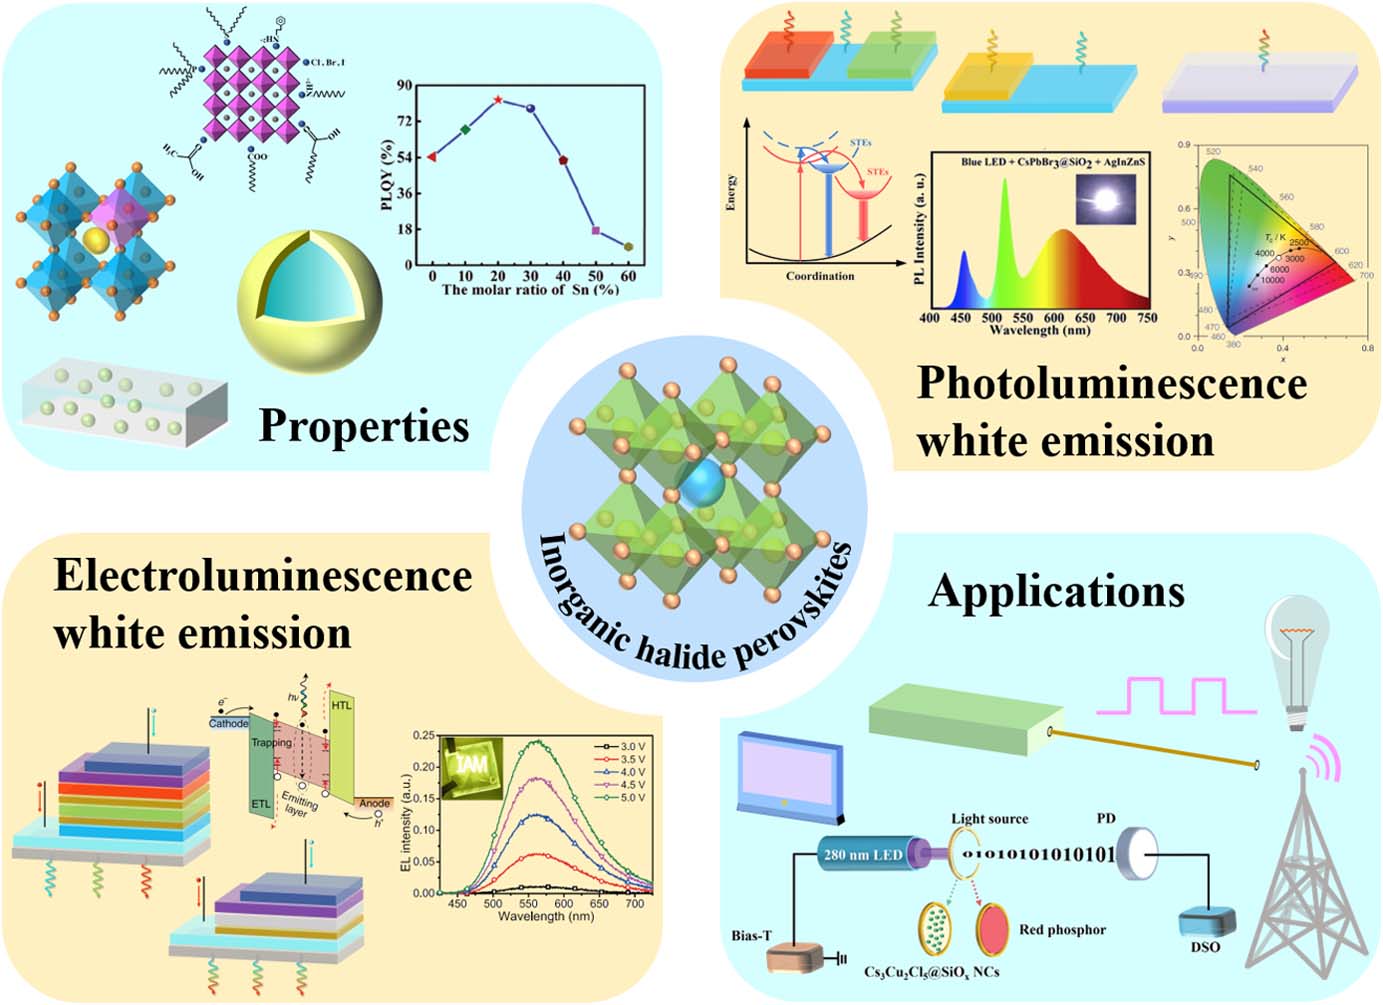 Summary of the review, which includes materials, photoluminescence, and electroluminescence white emission and application of inorganic halide perovskites.